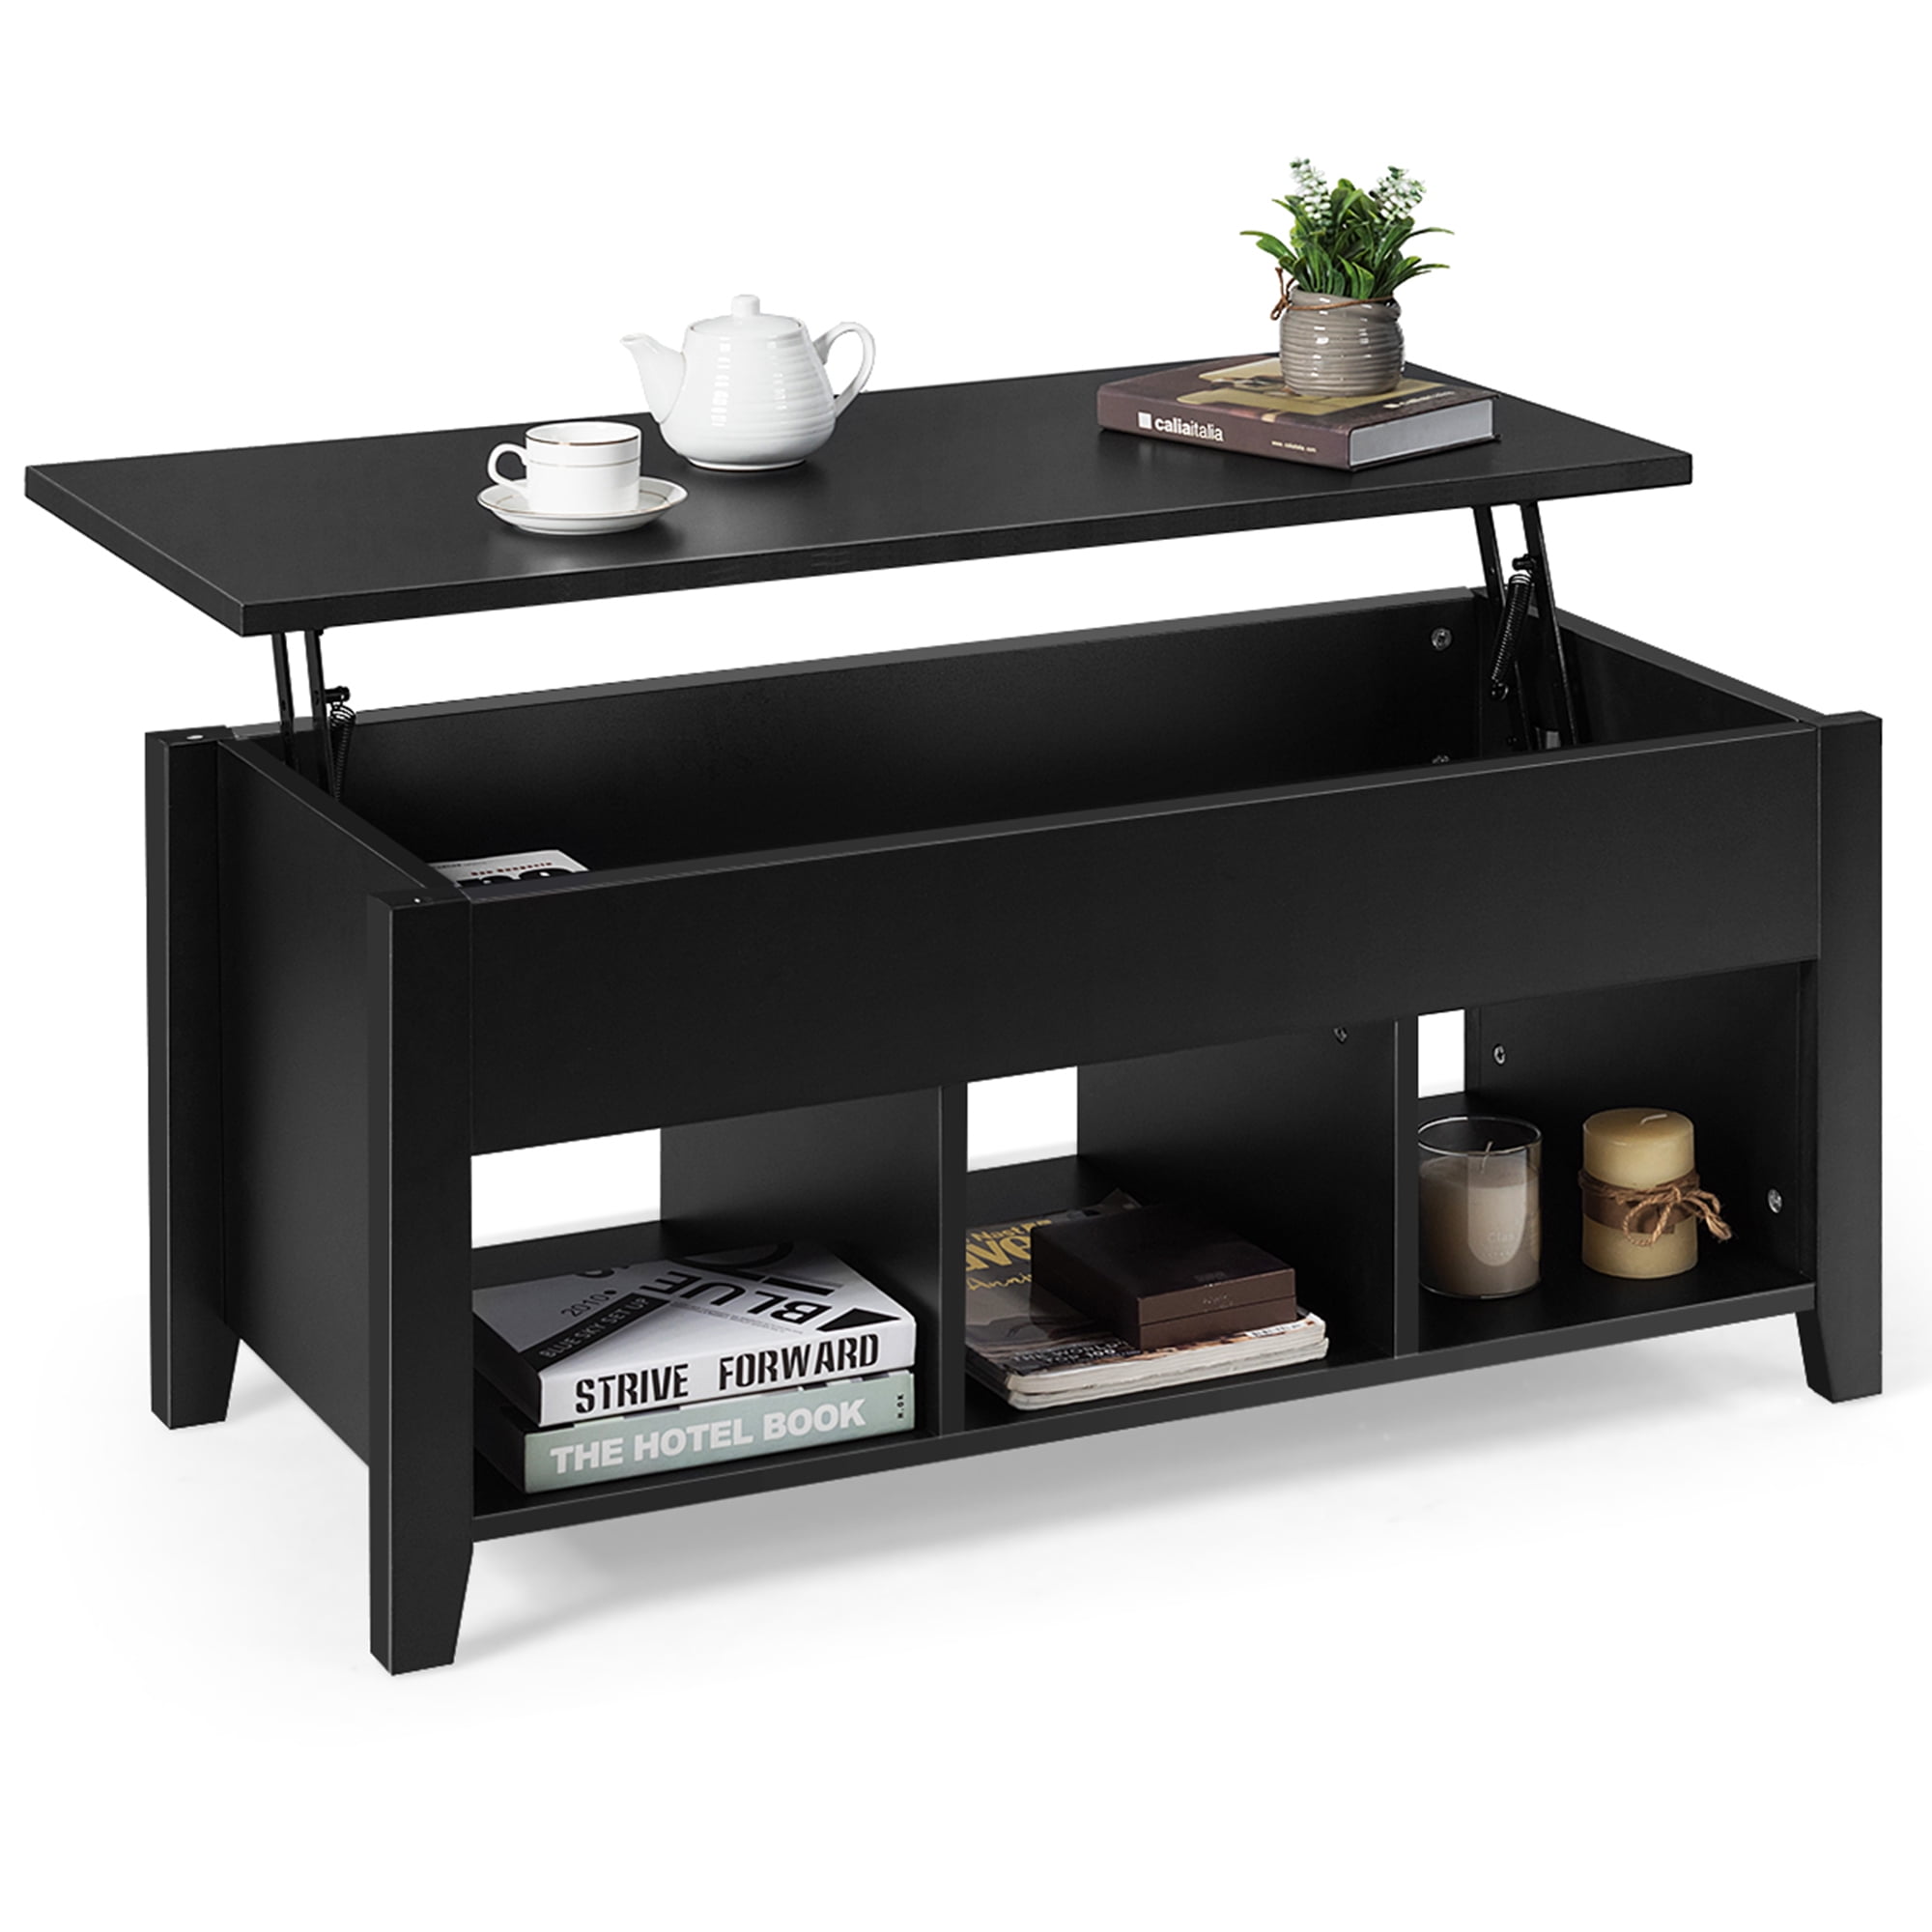 Gymax Lift Top Coffee Table w/ Storage Compartment Shelf Living Room